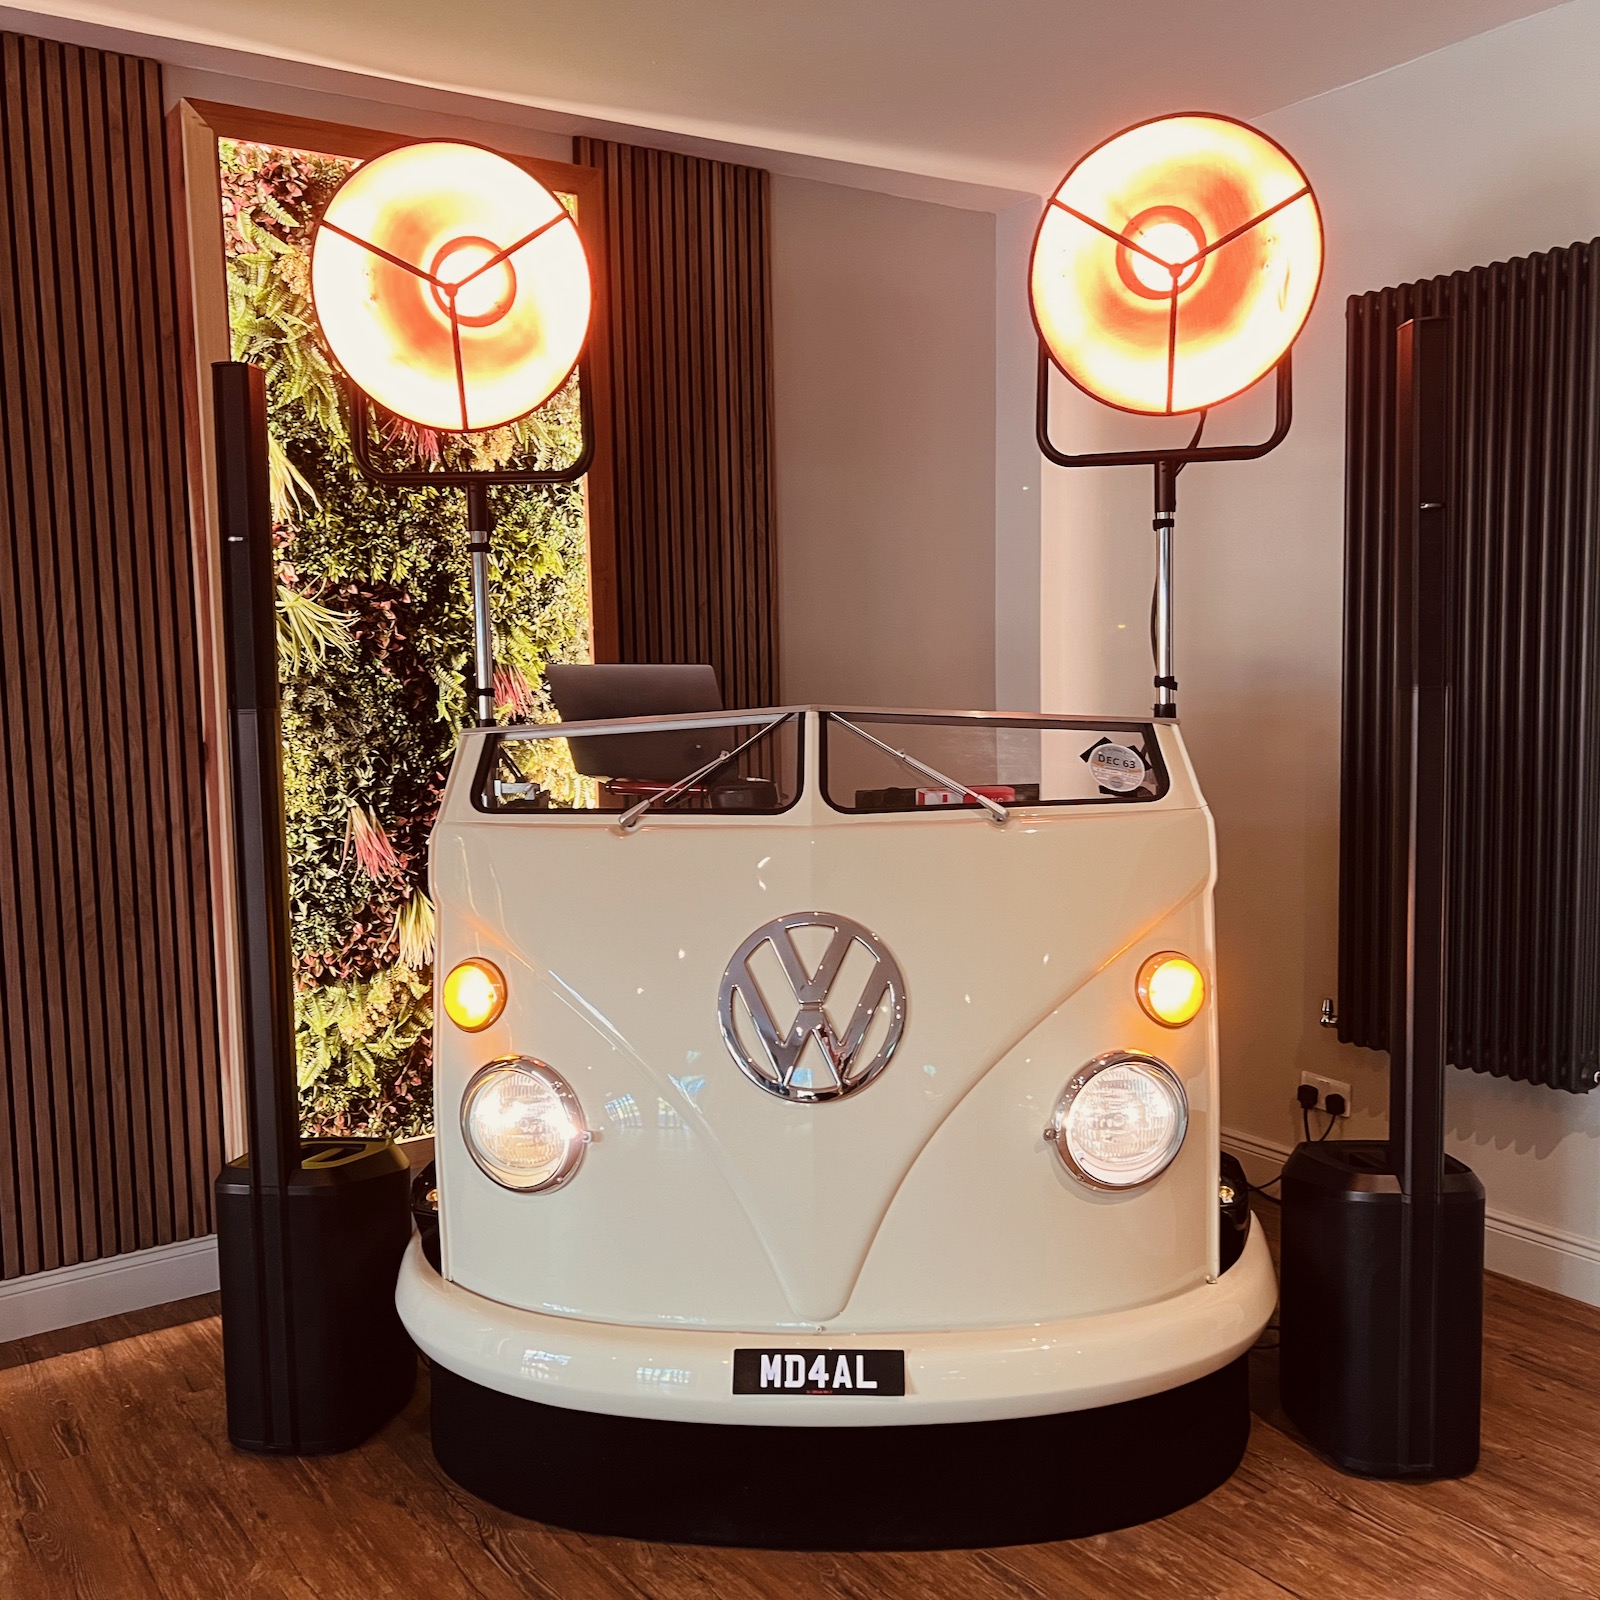 my vw dj booth at two woods estate for Alex and Mark's wedding